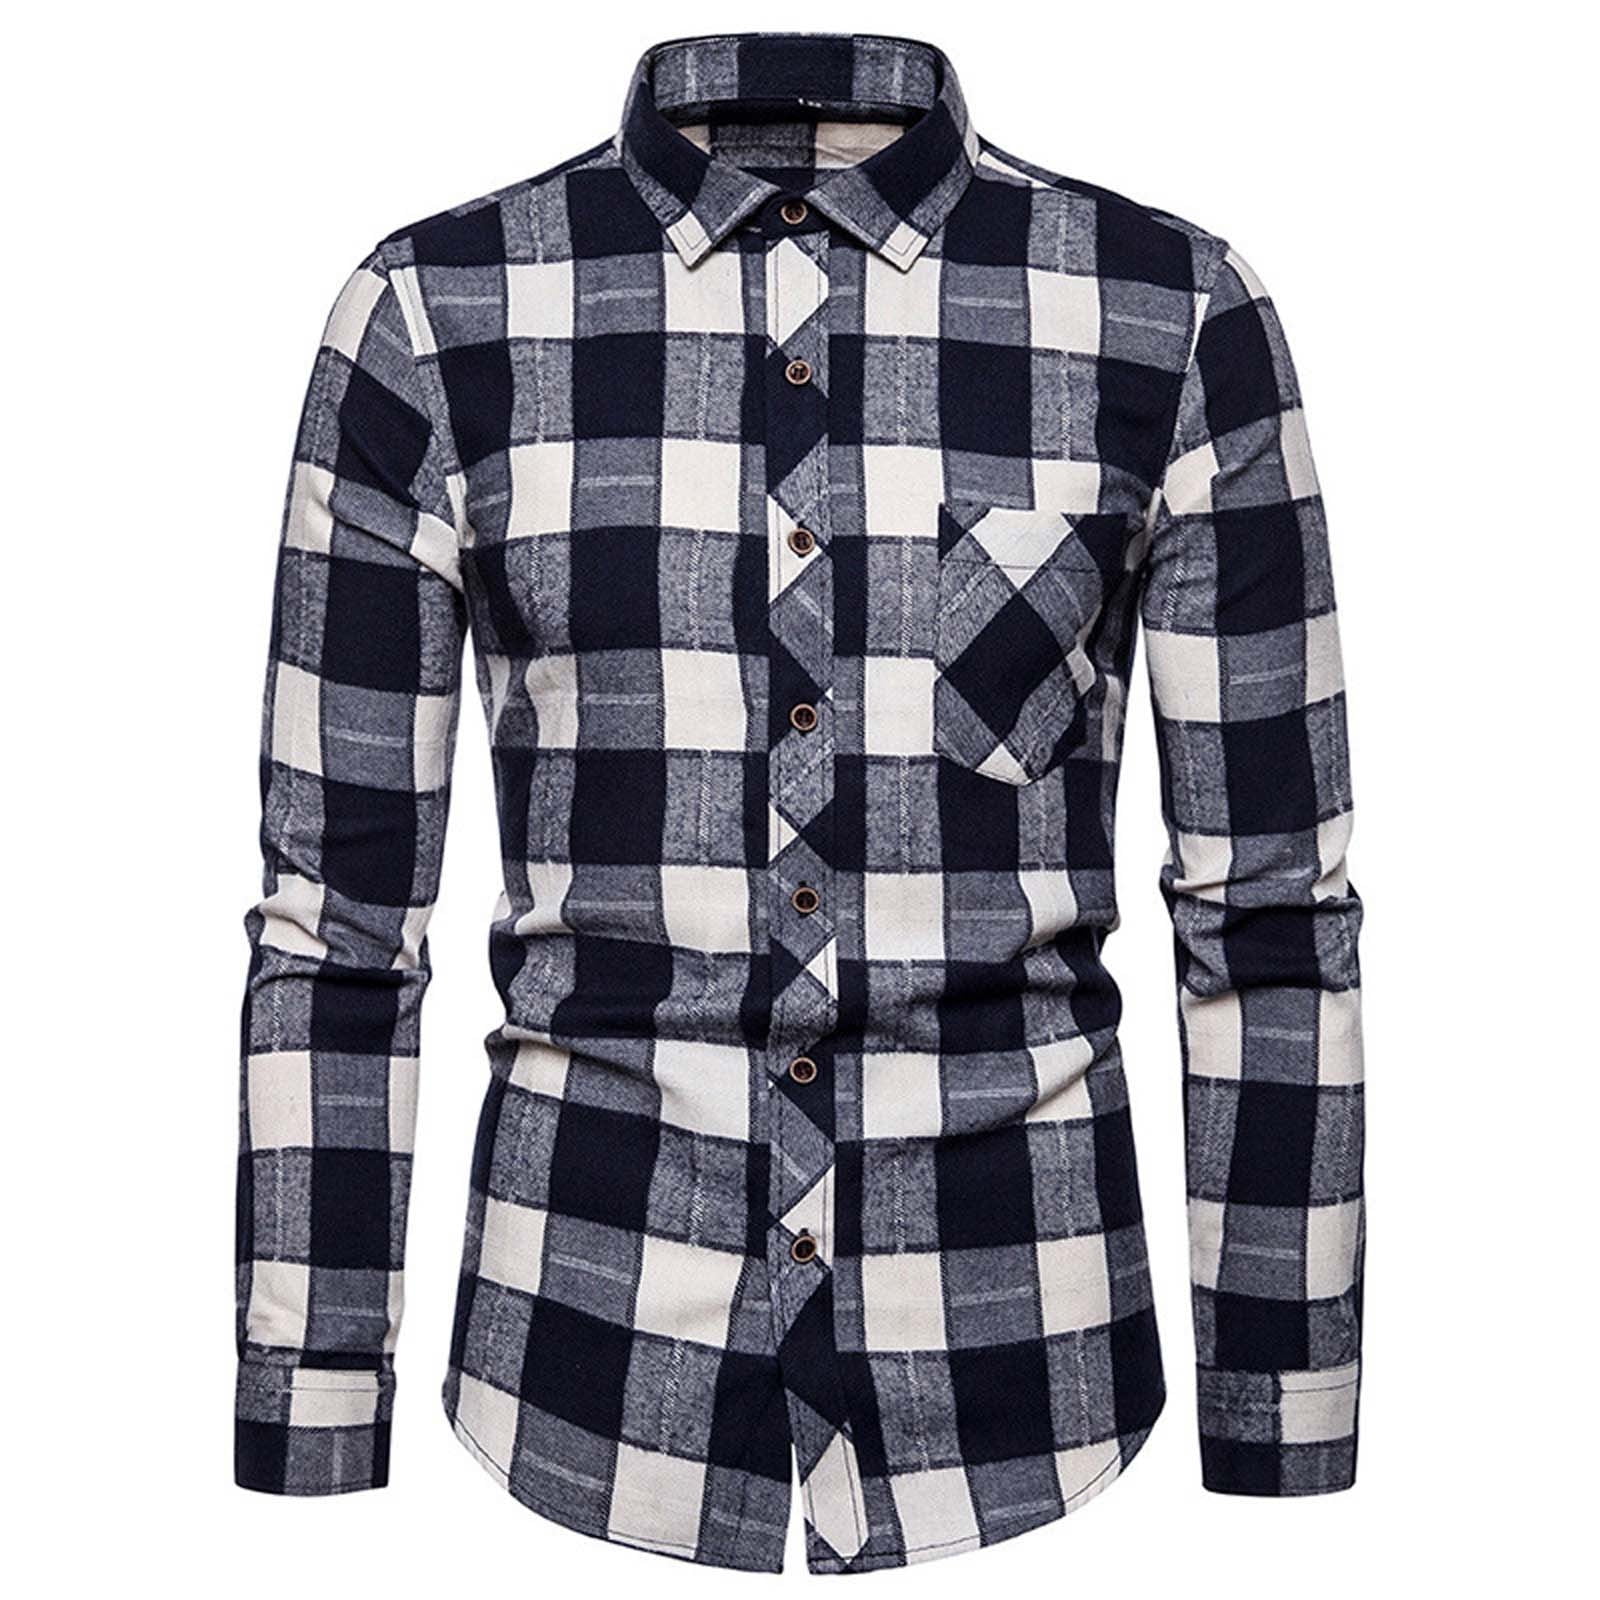 HAPIMO Men's Quilted Lined Flannel Jackets Plaid Shirt Jacket Button ...